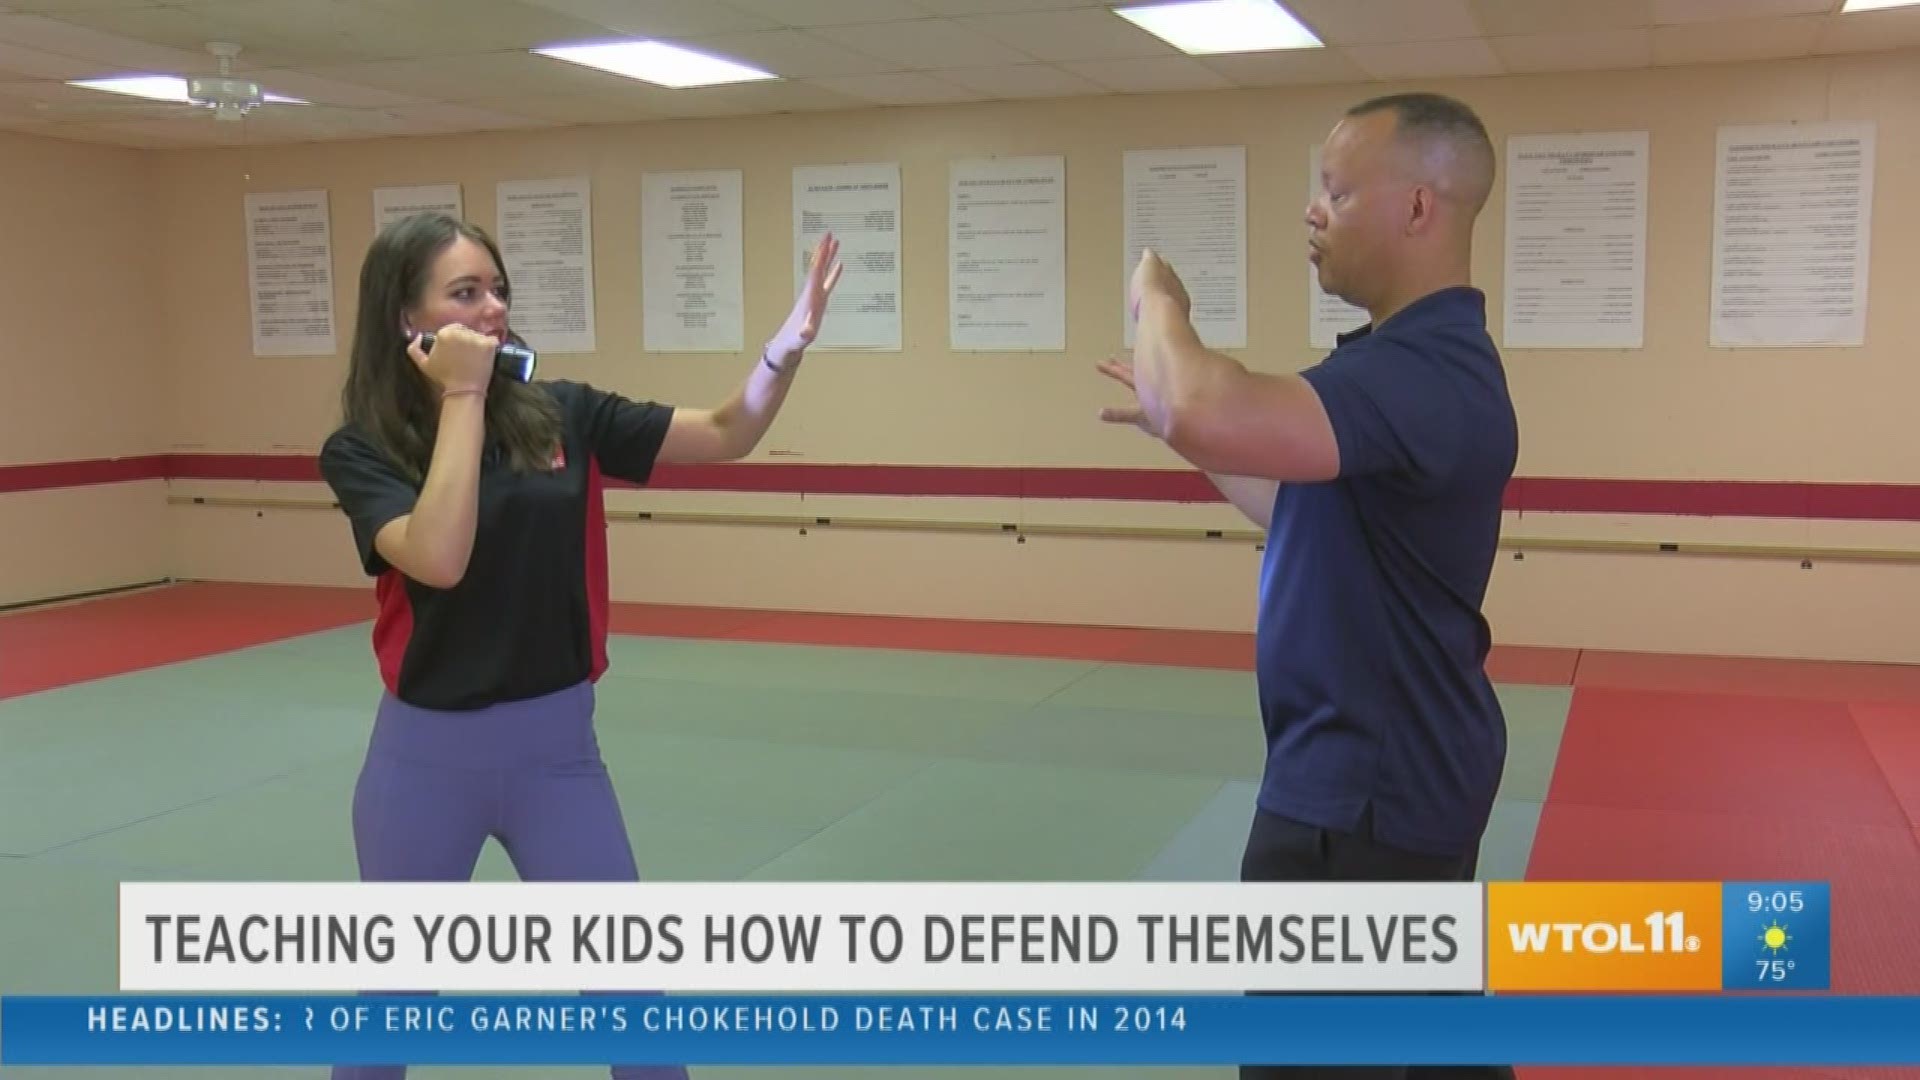 Police officer says kids should learn self-defense techniques | wtol.com